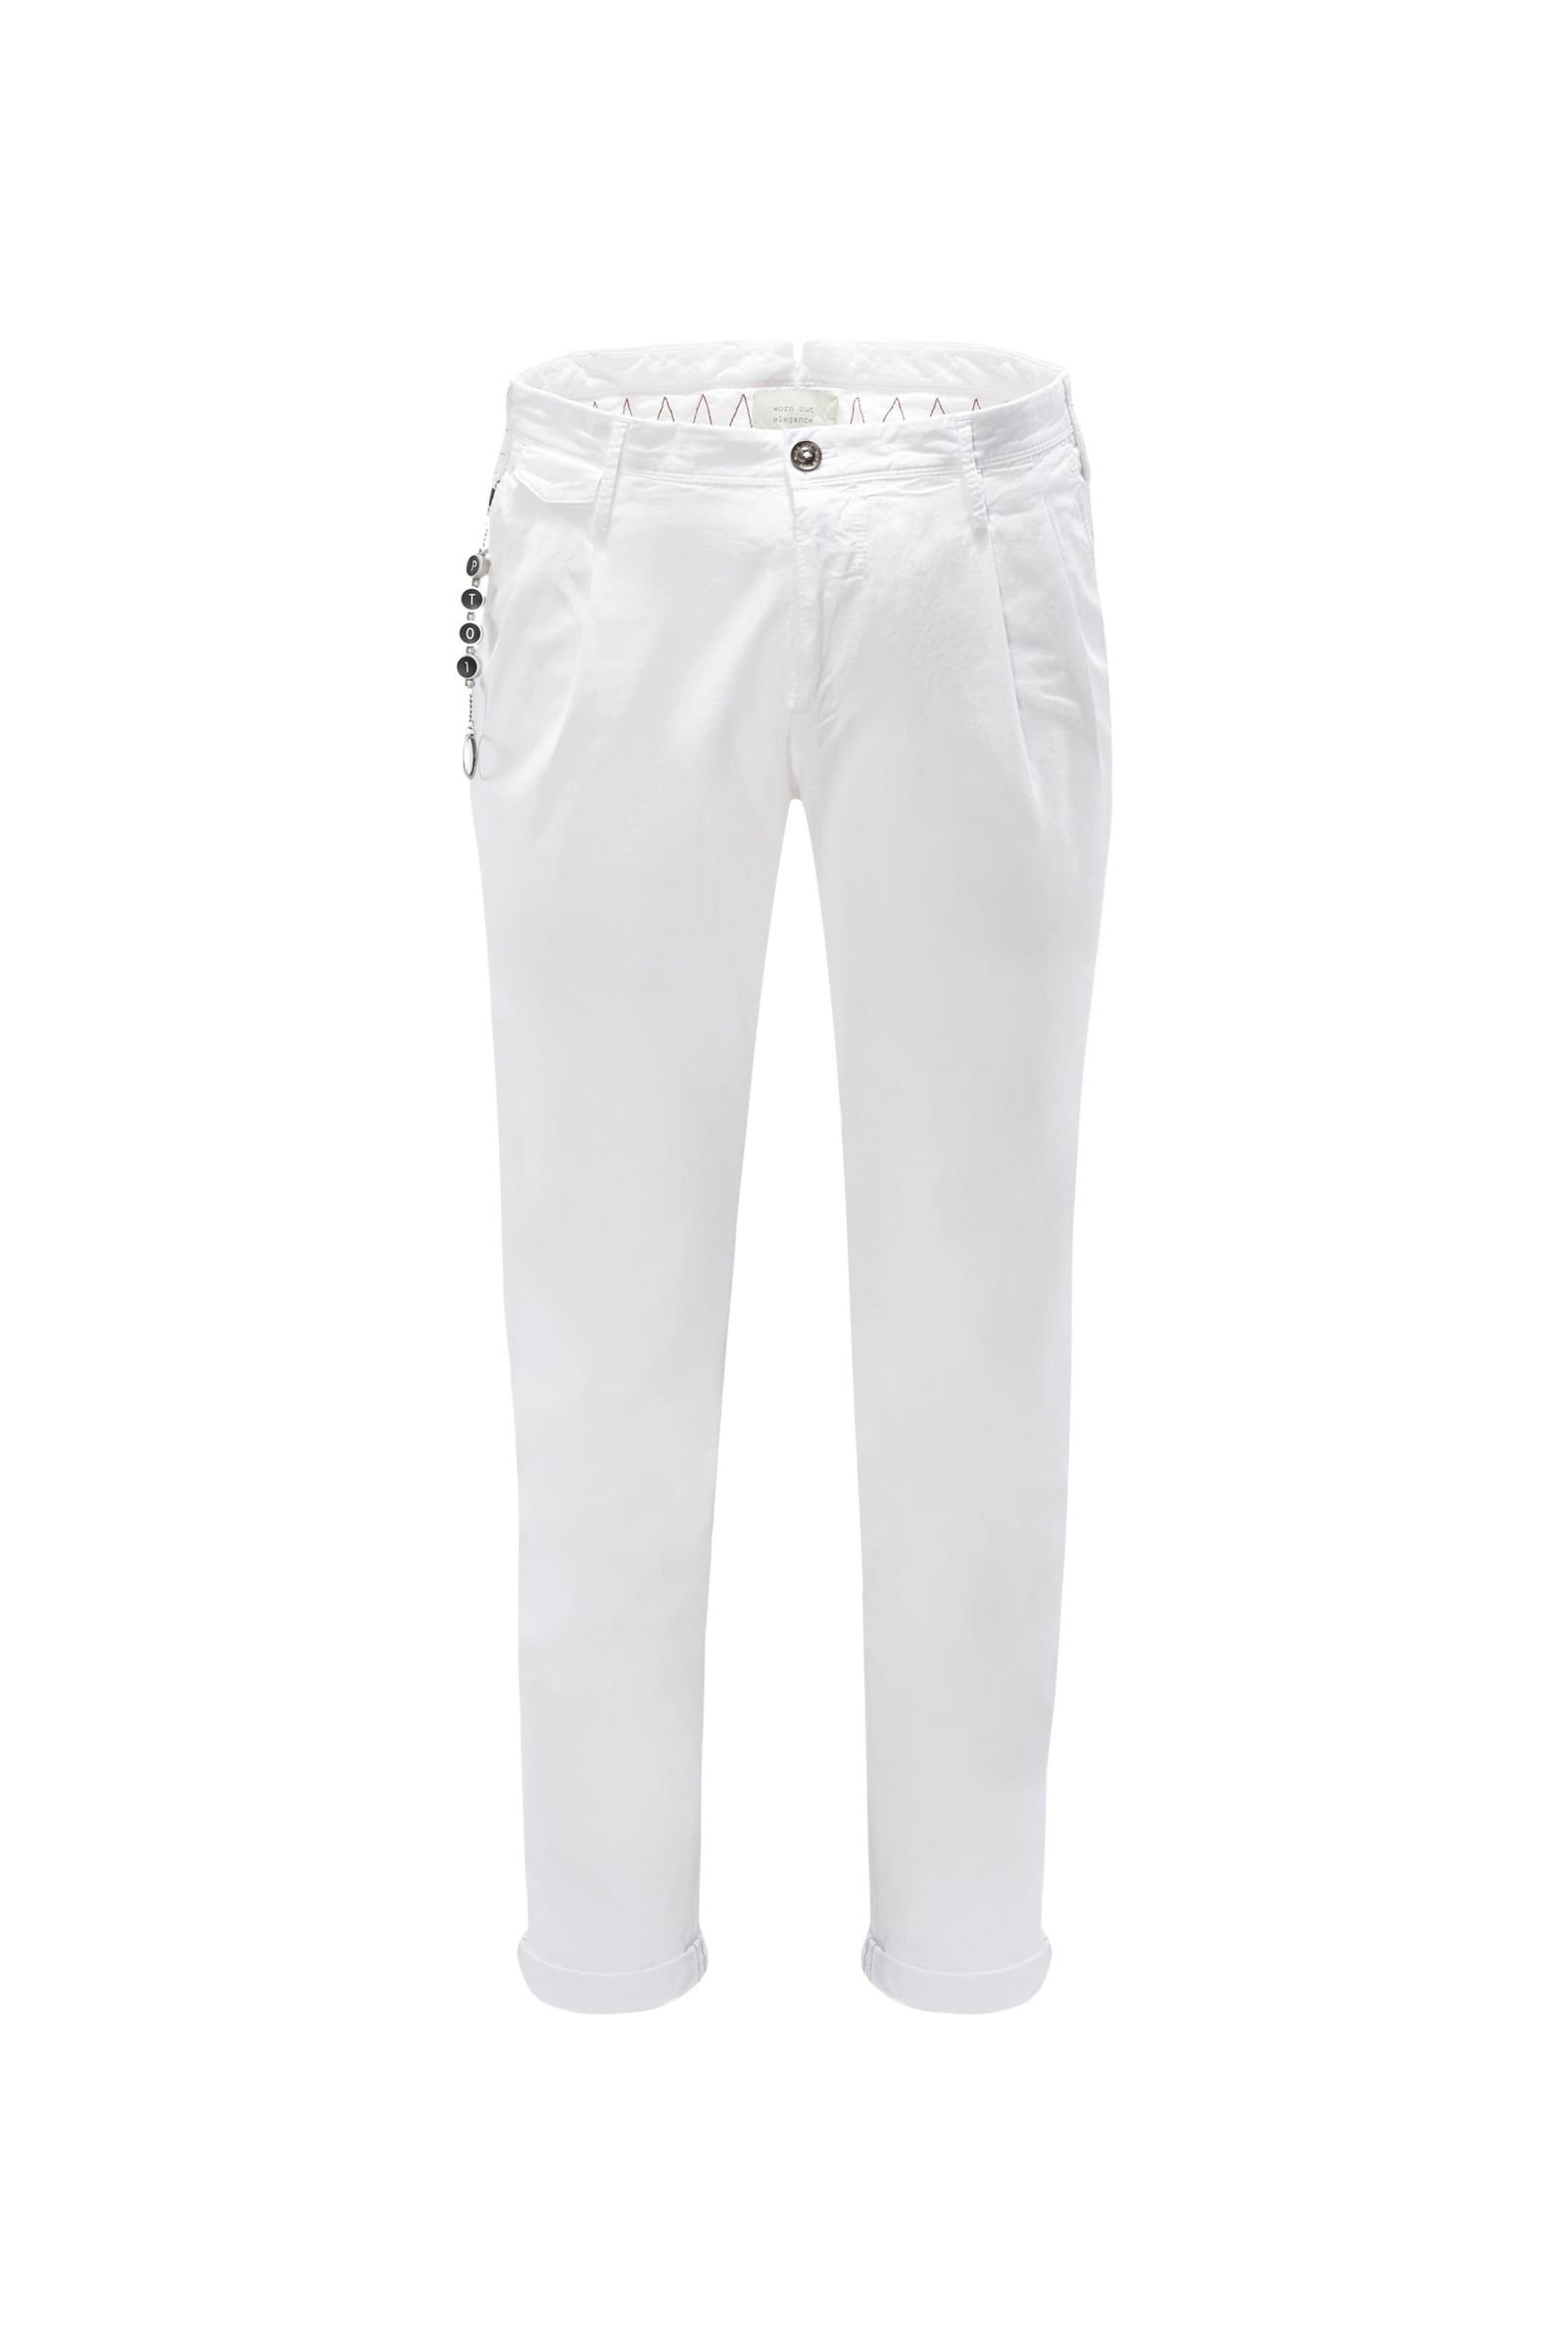 Cotton trousers 'Worn out Elegance' white